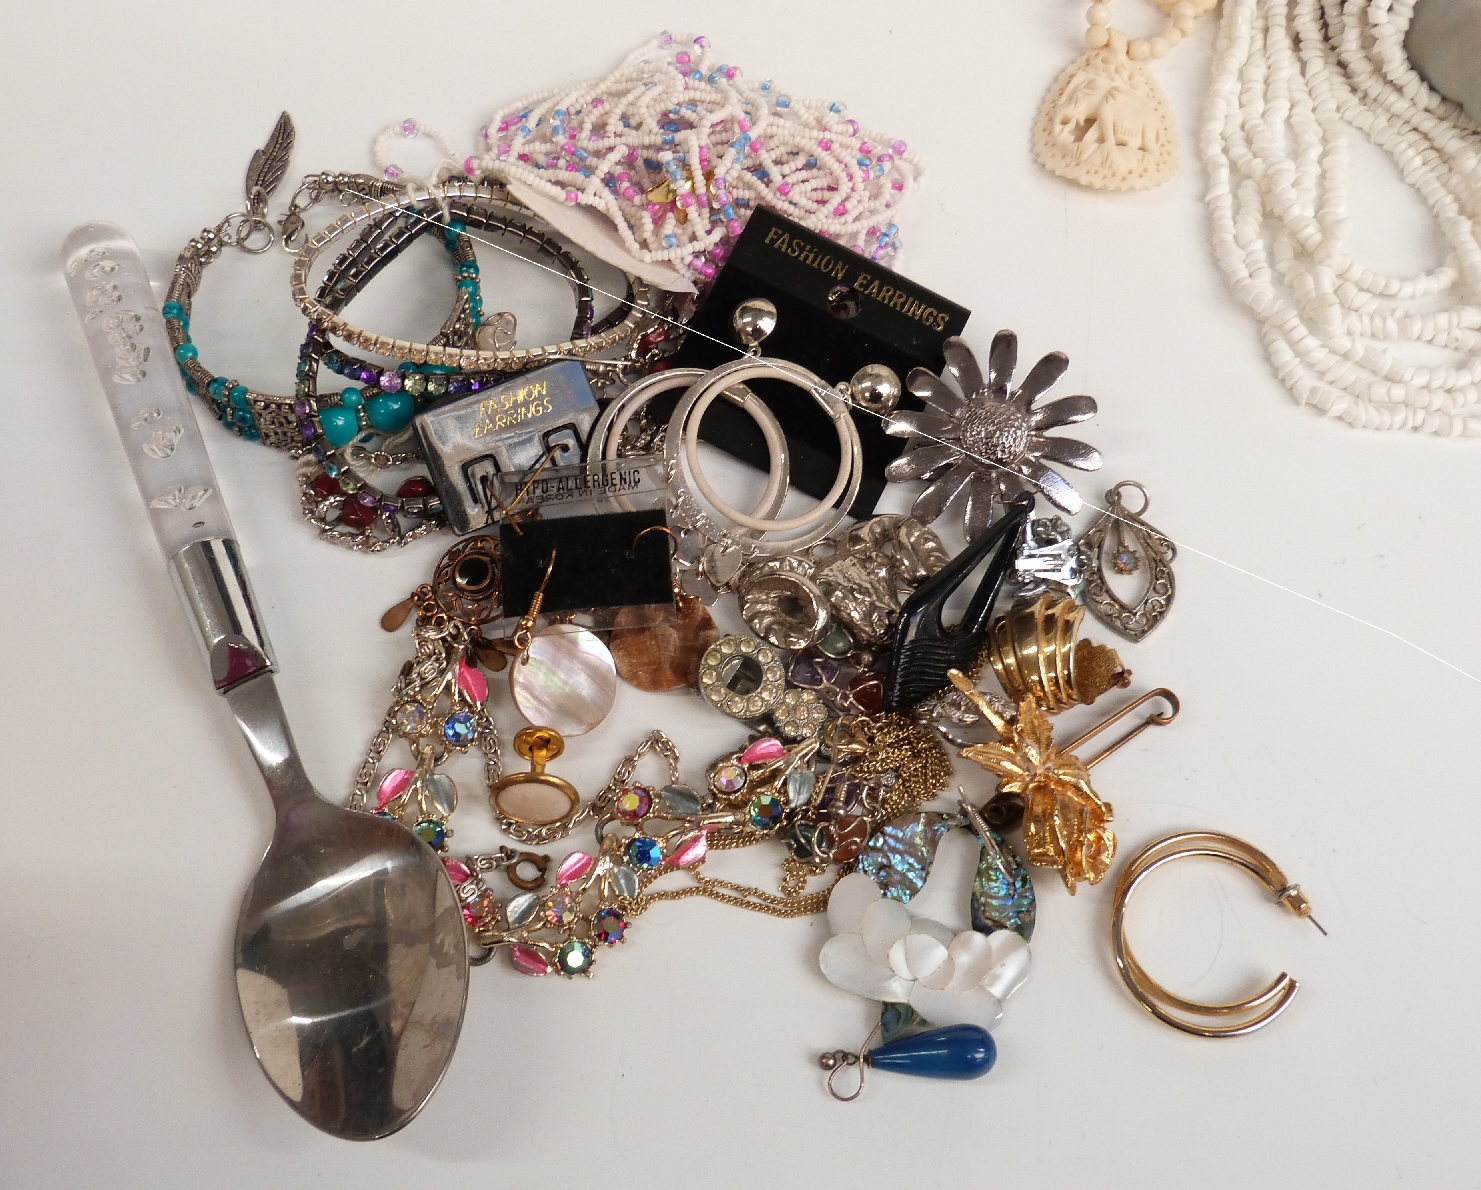 A large collection of costume jewellery including brooches, beads, bracelets, cufflinks, chains, - Image 4 of 14